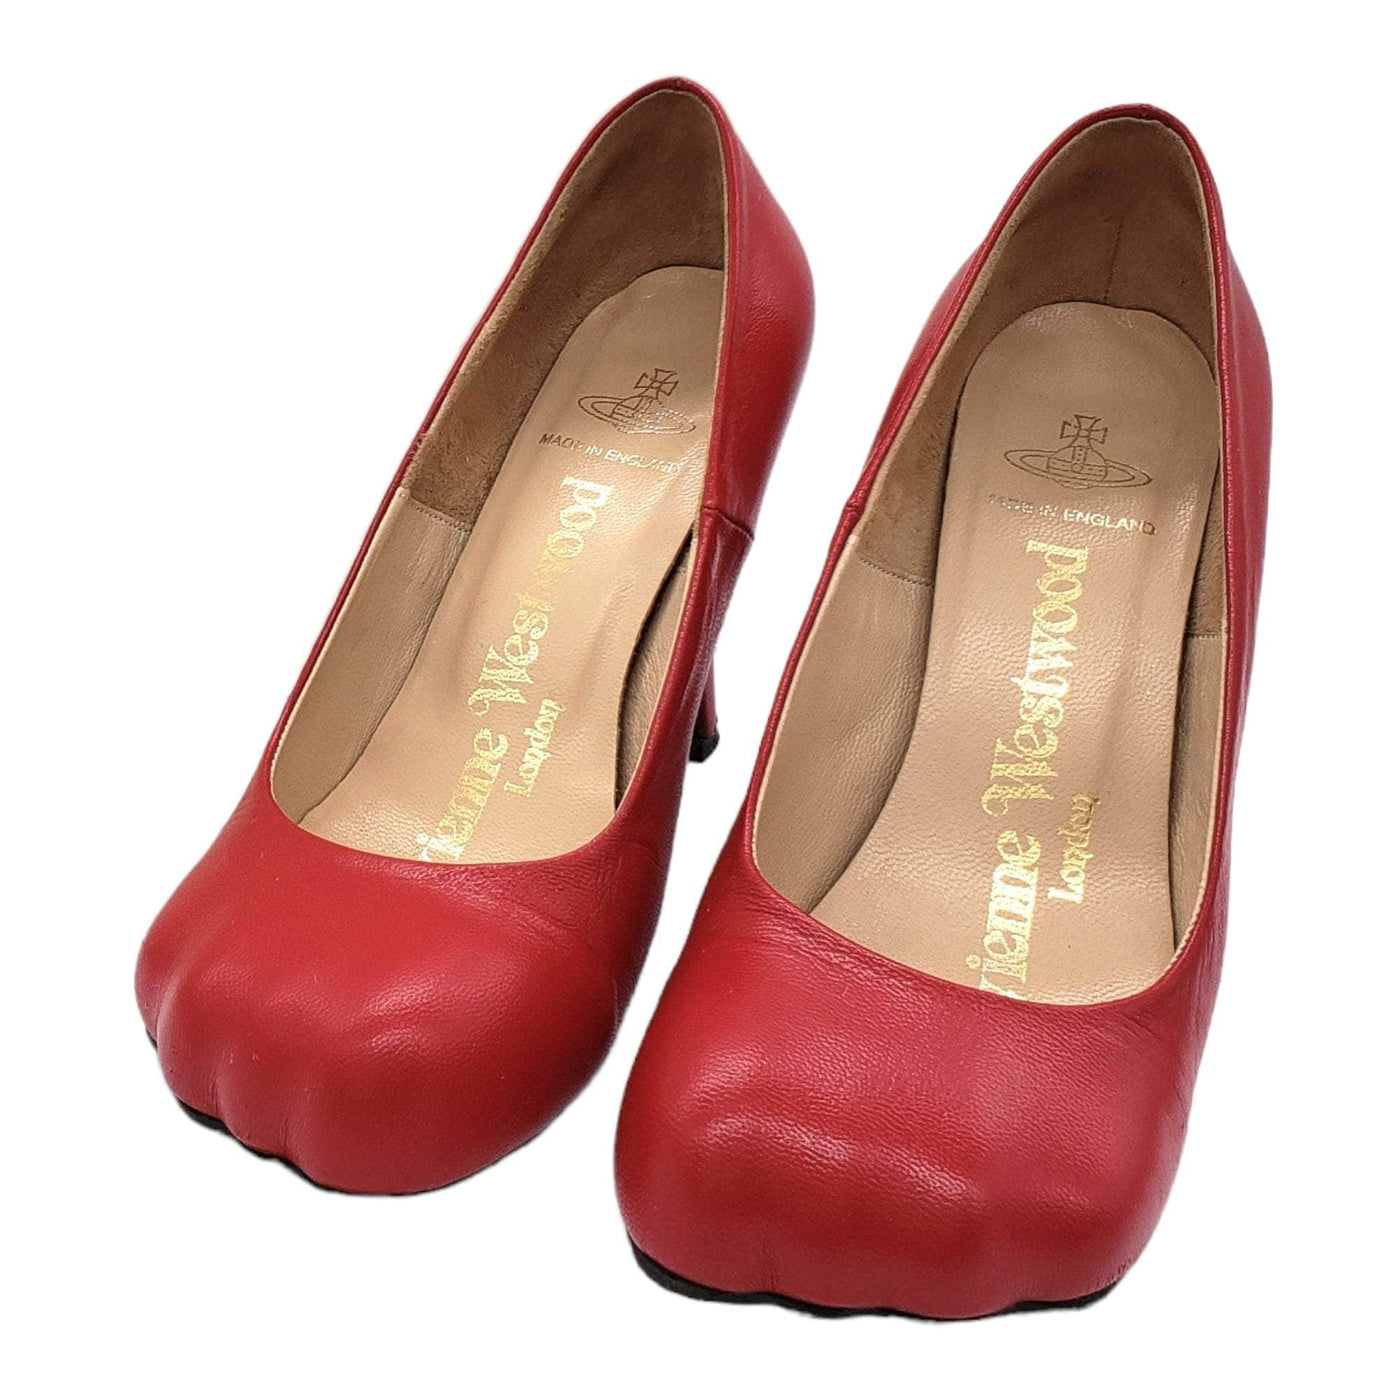 Vivienne Westwood Animal Toe Shoes | Shop from Crisis Online